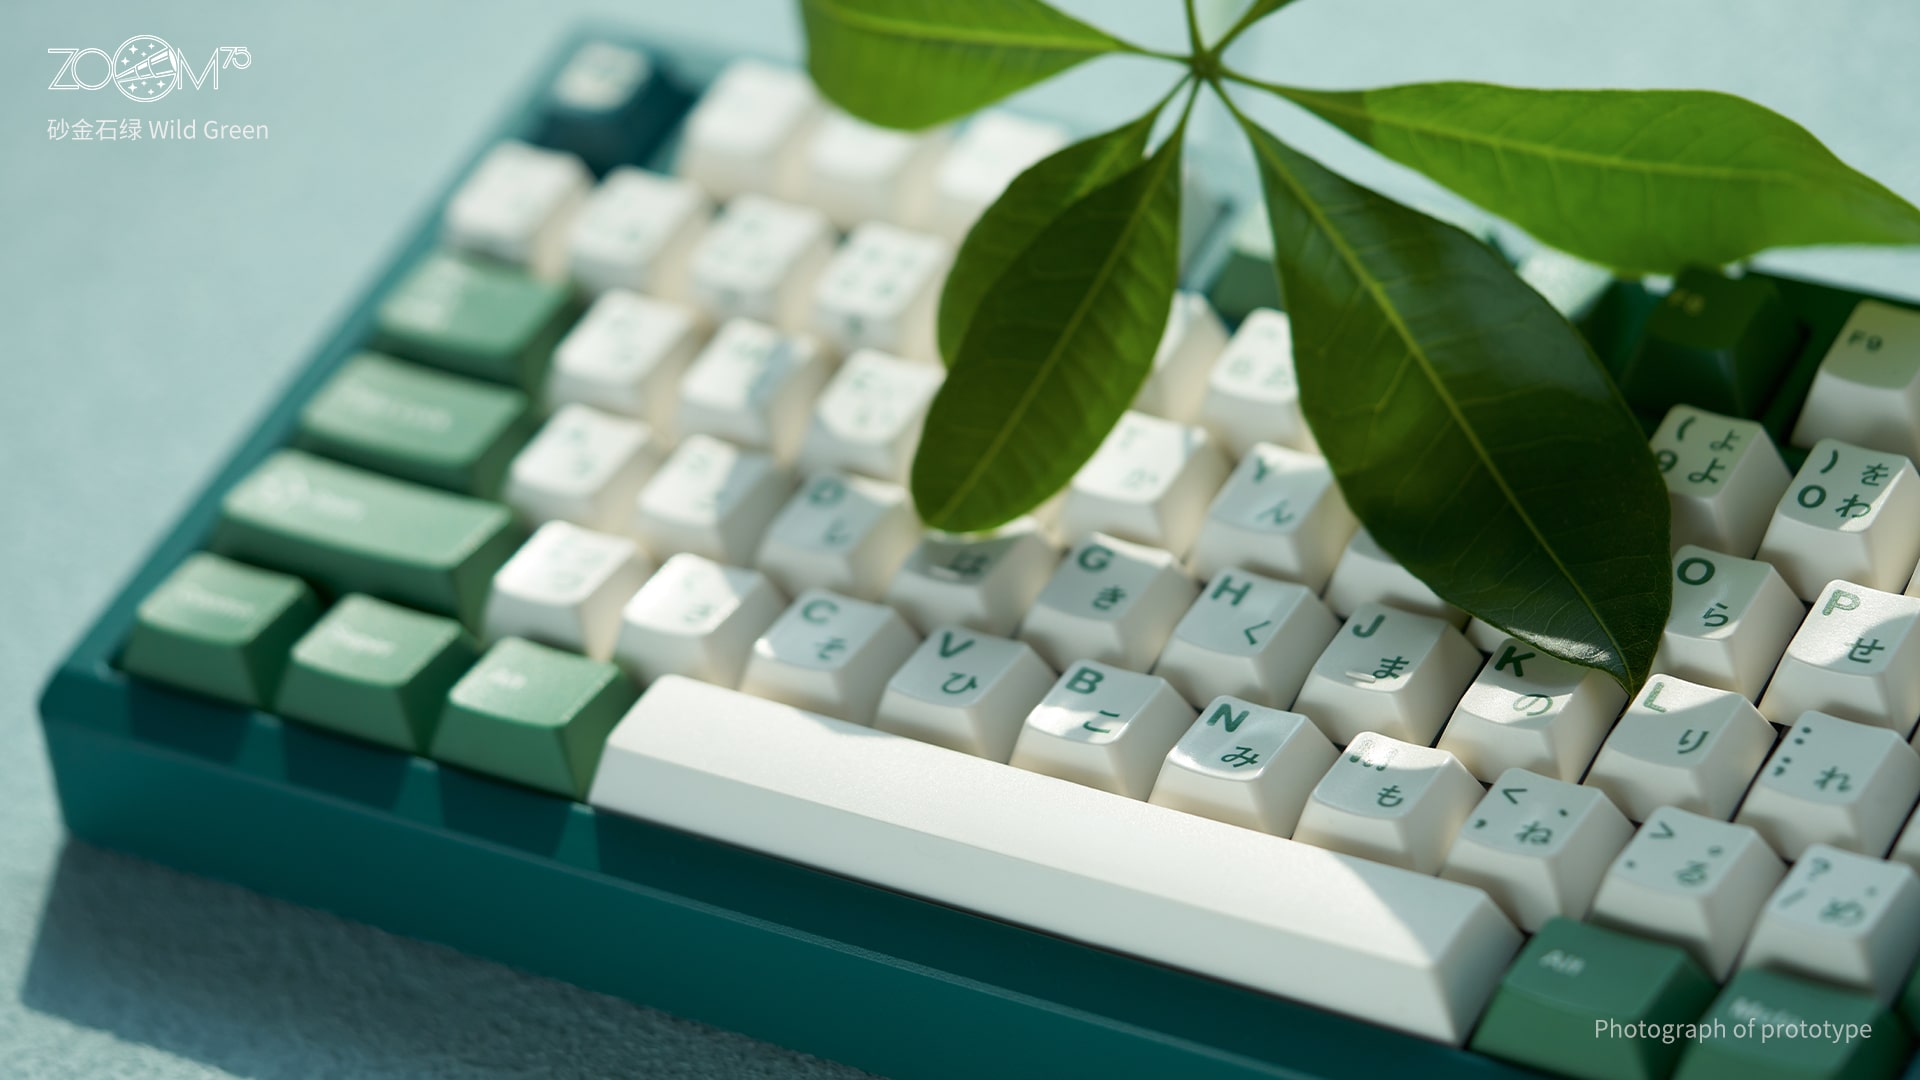 [Extra GB] [Oct] Zoom75 Keyboard Essential Edition - Case Wild Green